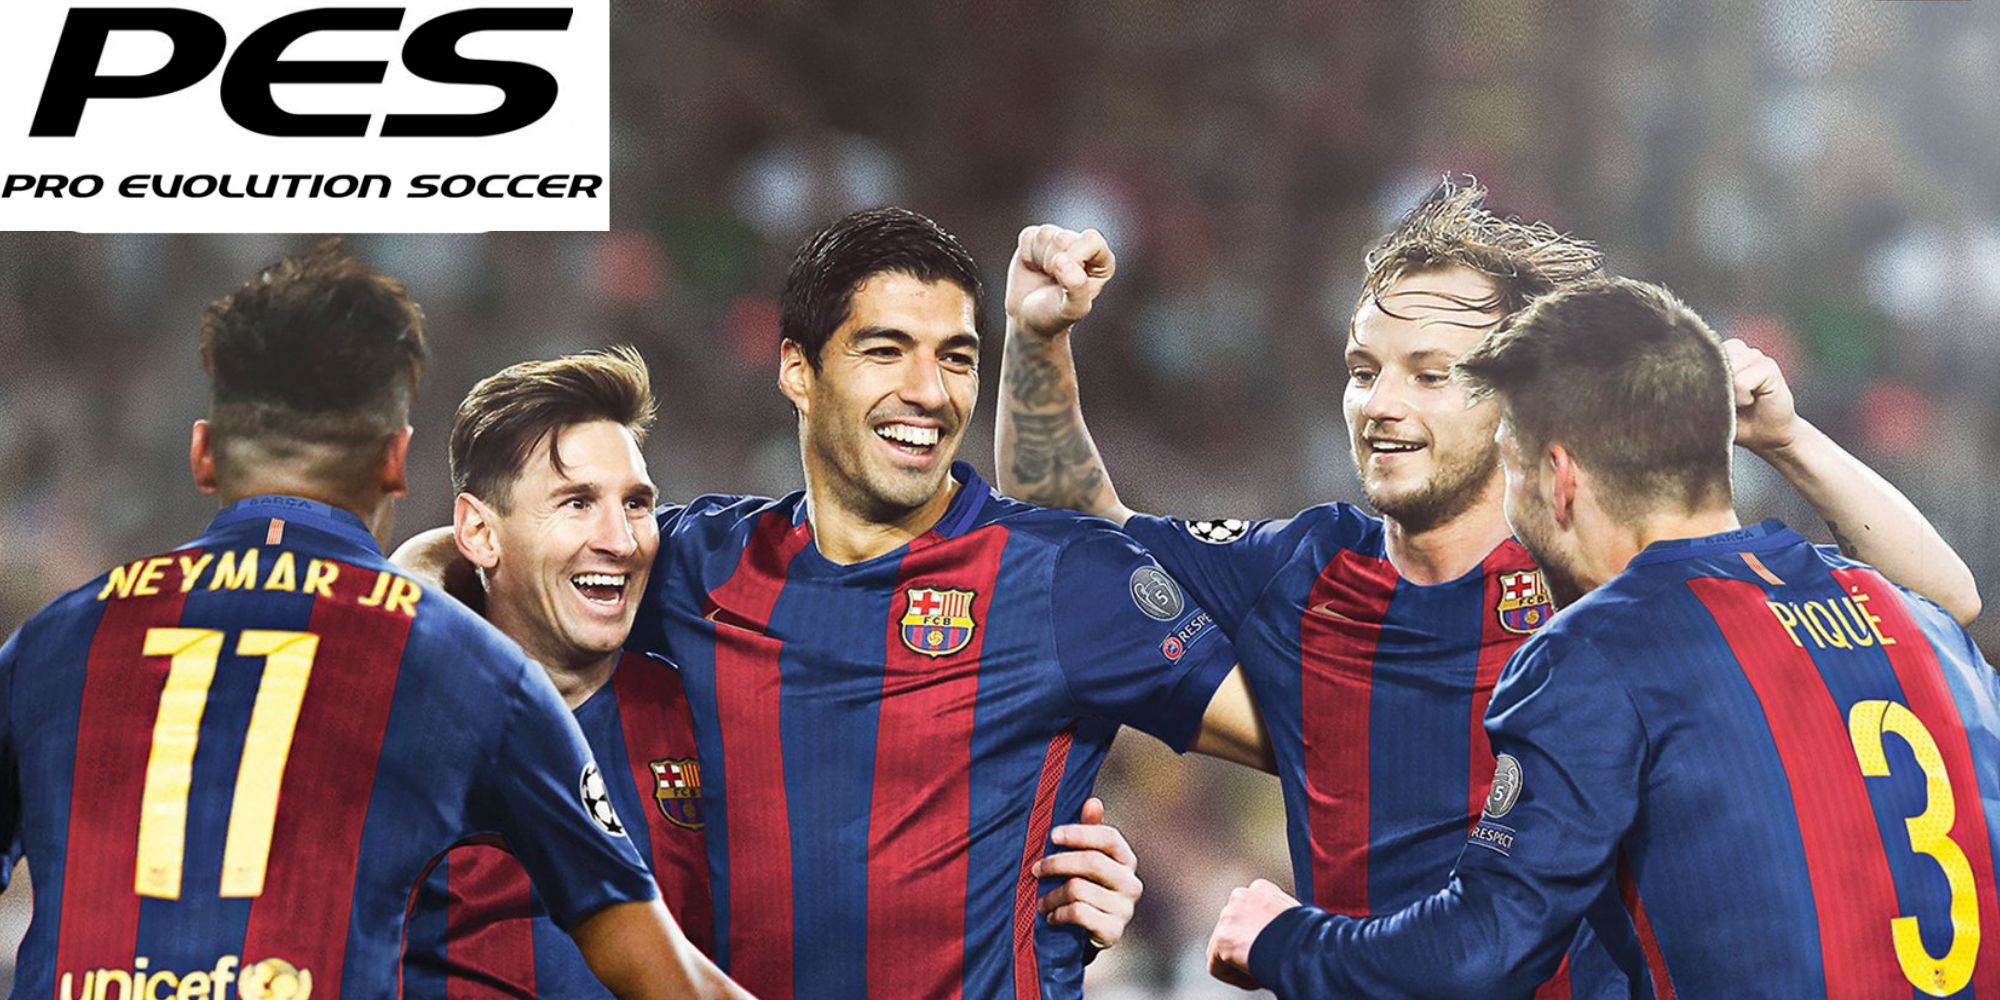 Promotional Image Showing Real Footballers with PES Logo In Top Left Corner